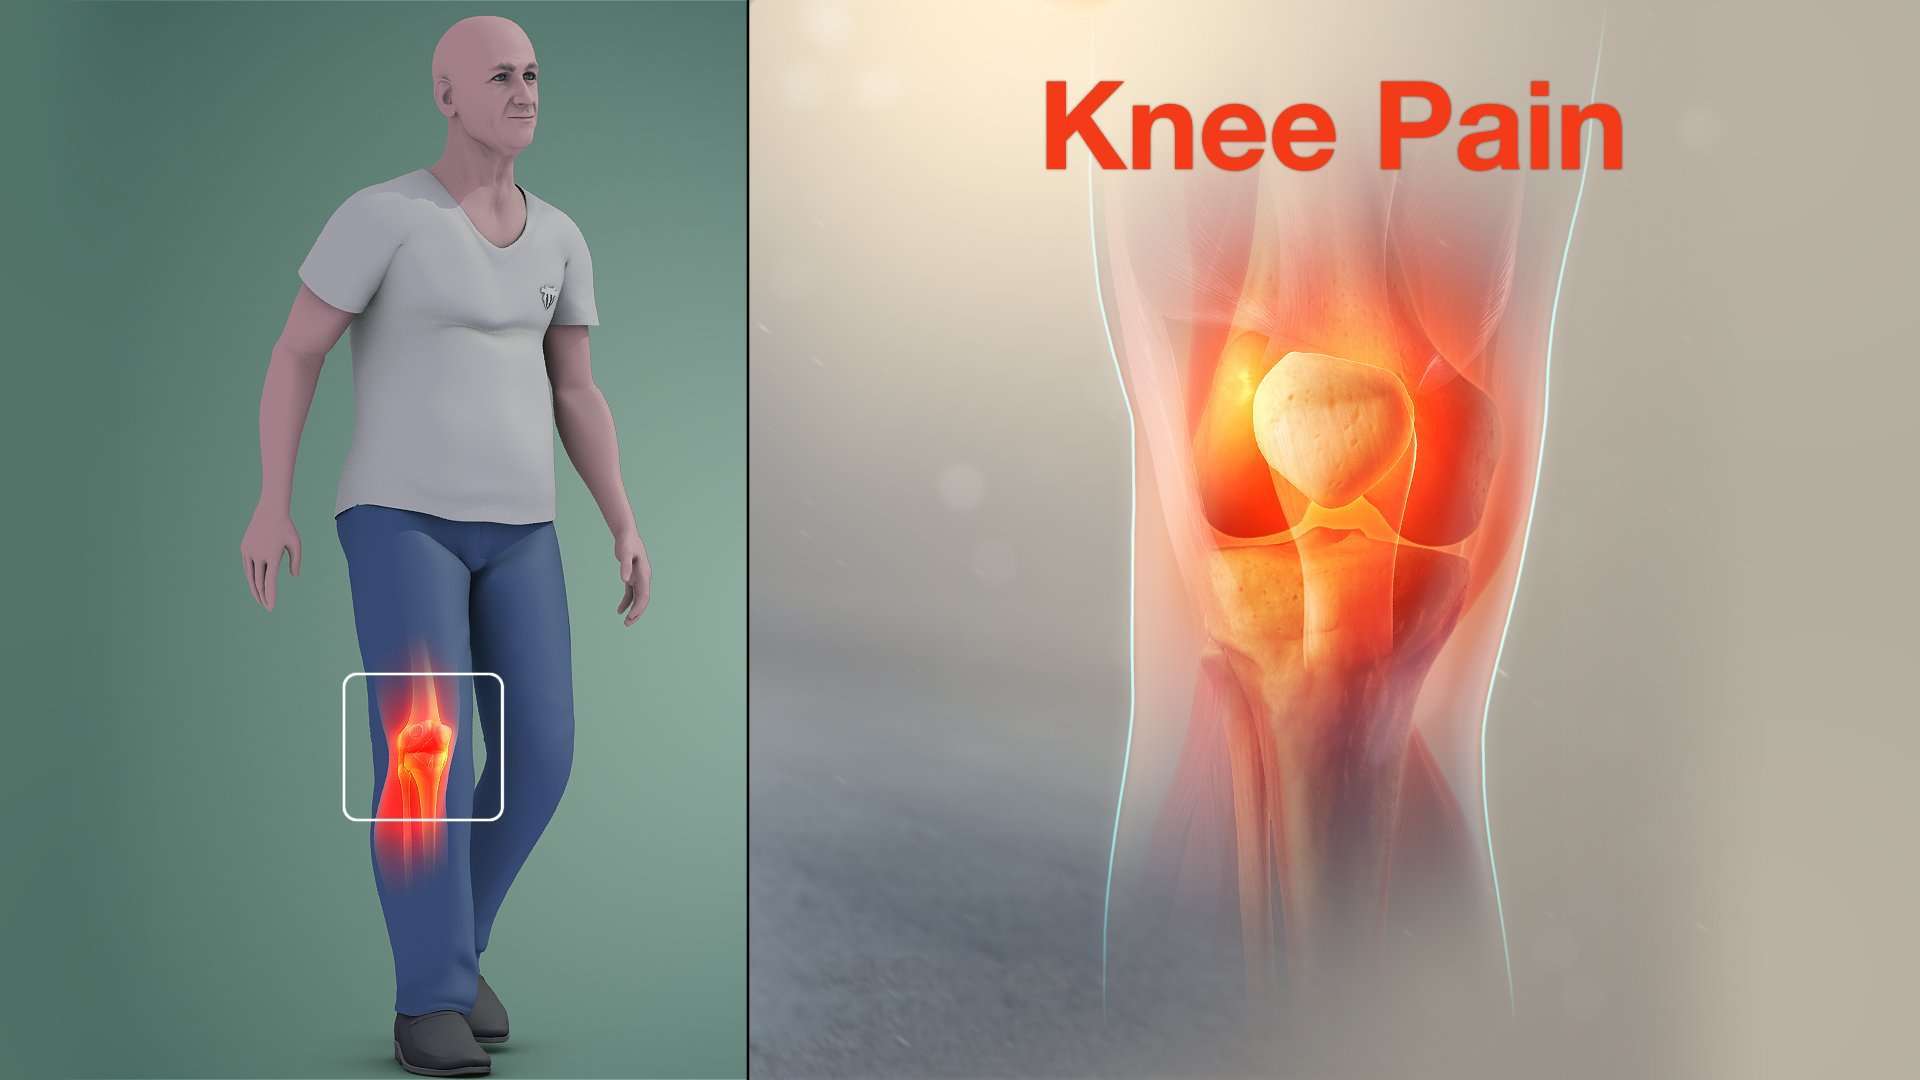 Knee Pain Caused By Damage In Knee Joint Shown Using ...